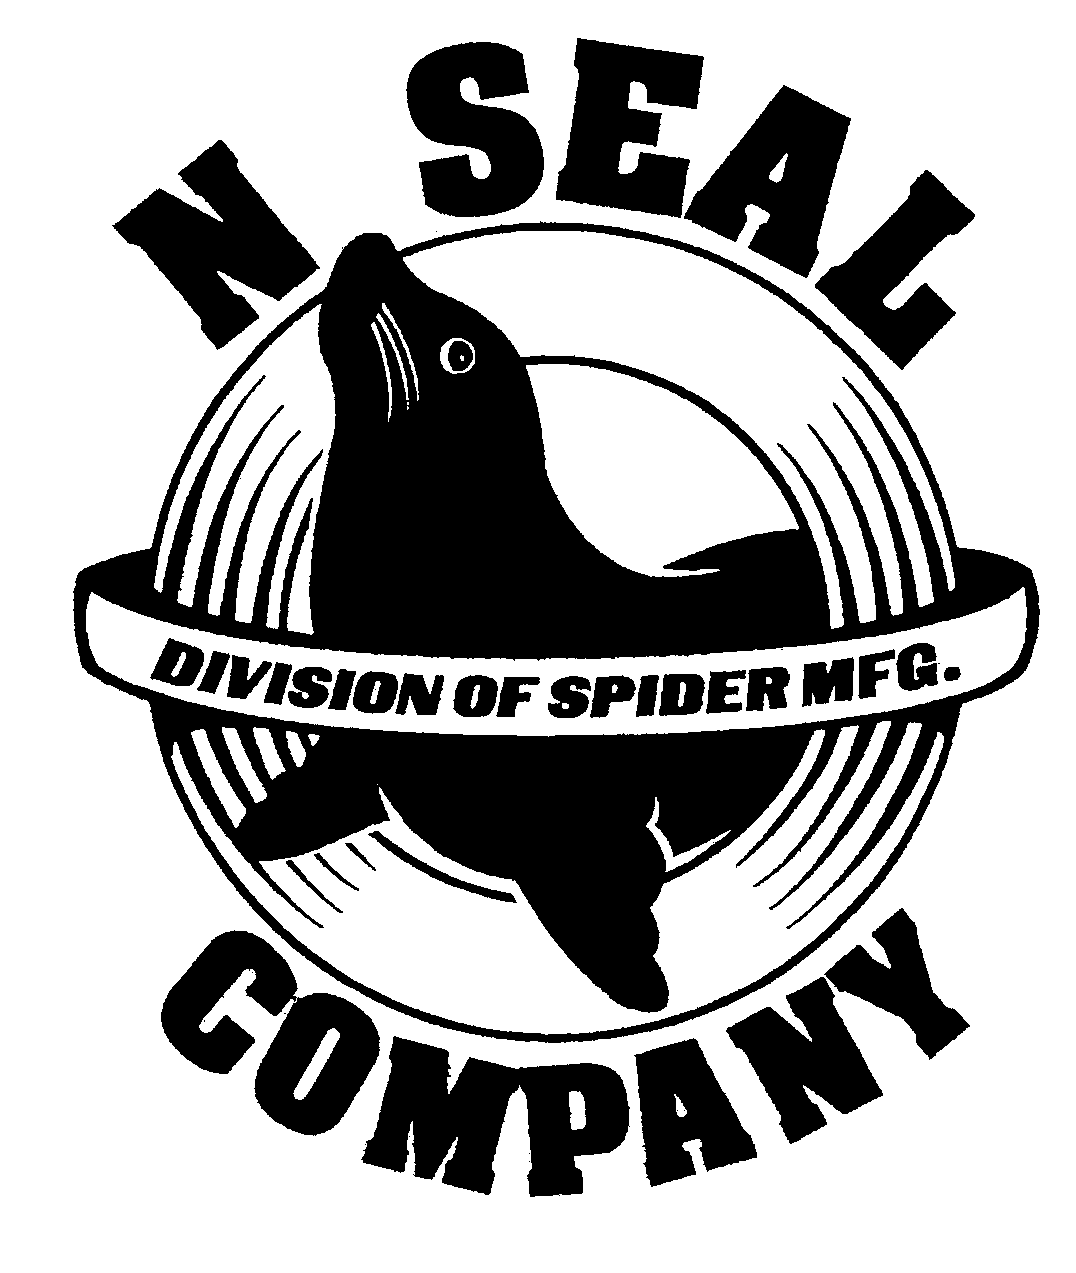  N SEAL COMPANY DIVISION OF SPIDER MFG.